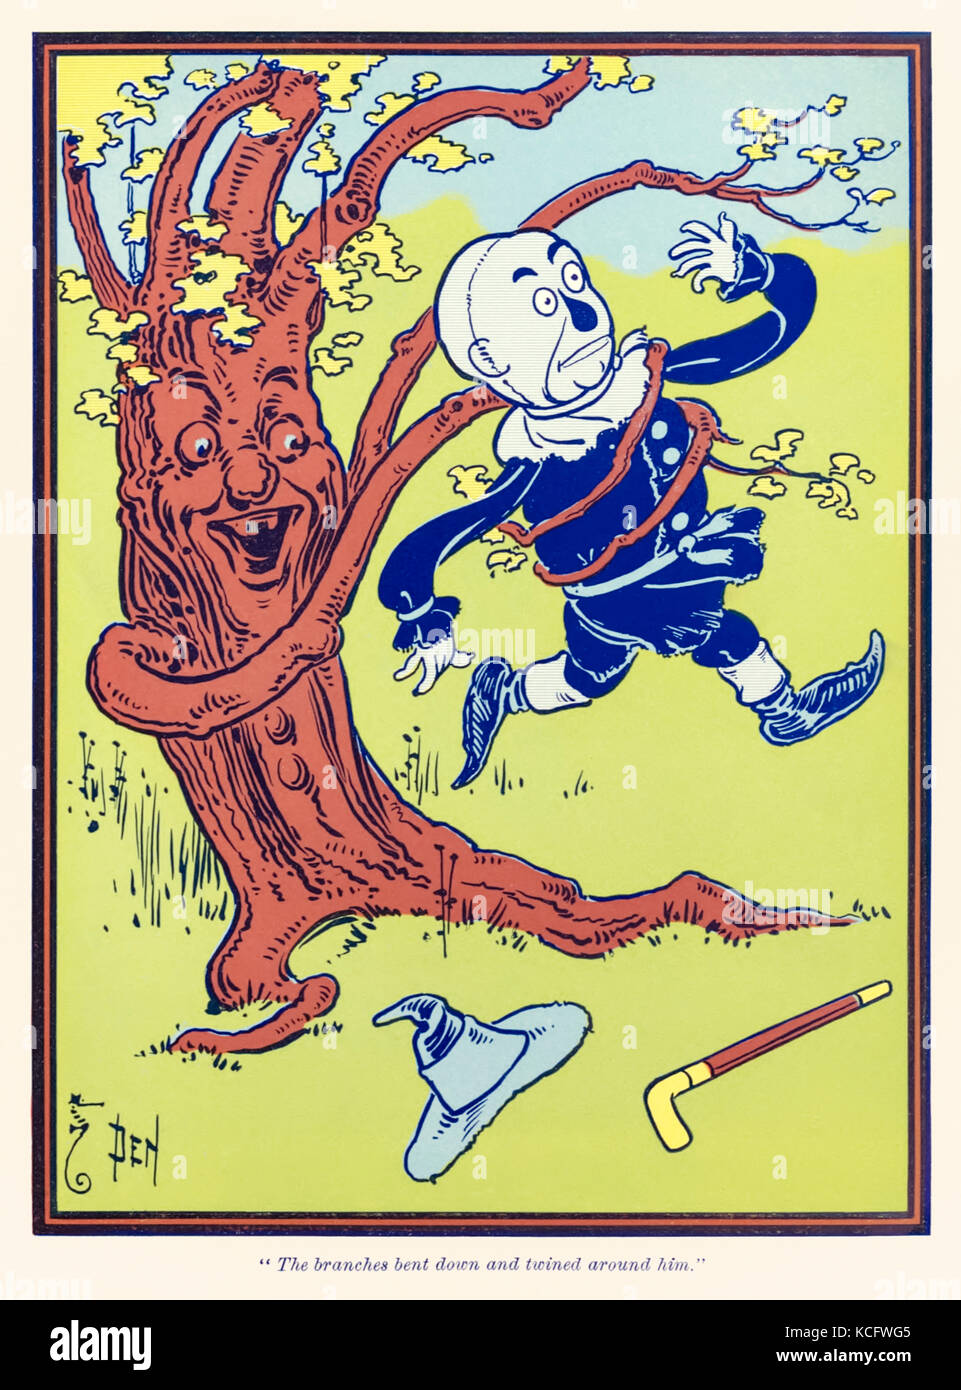 “The branches bent down and twined around him.” from ‘The Wonderful Wizard of Oz’ by L. Frank Baum (1856-1919) with pictures by W. W. Denslow (1856-1915). See more information below. Stock Photo